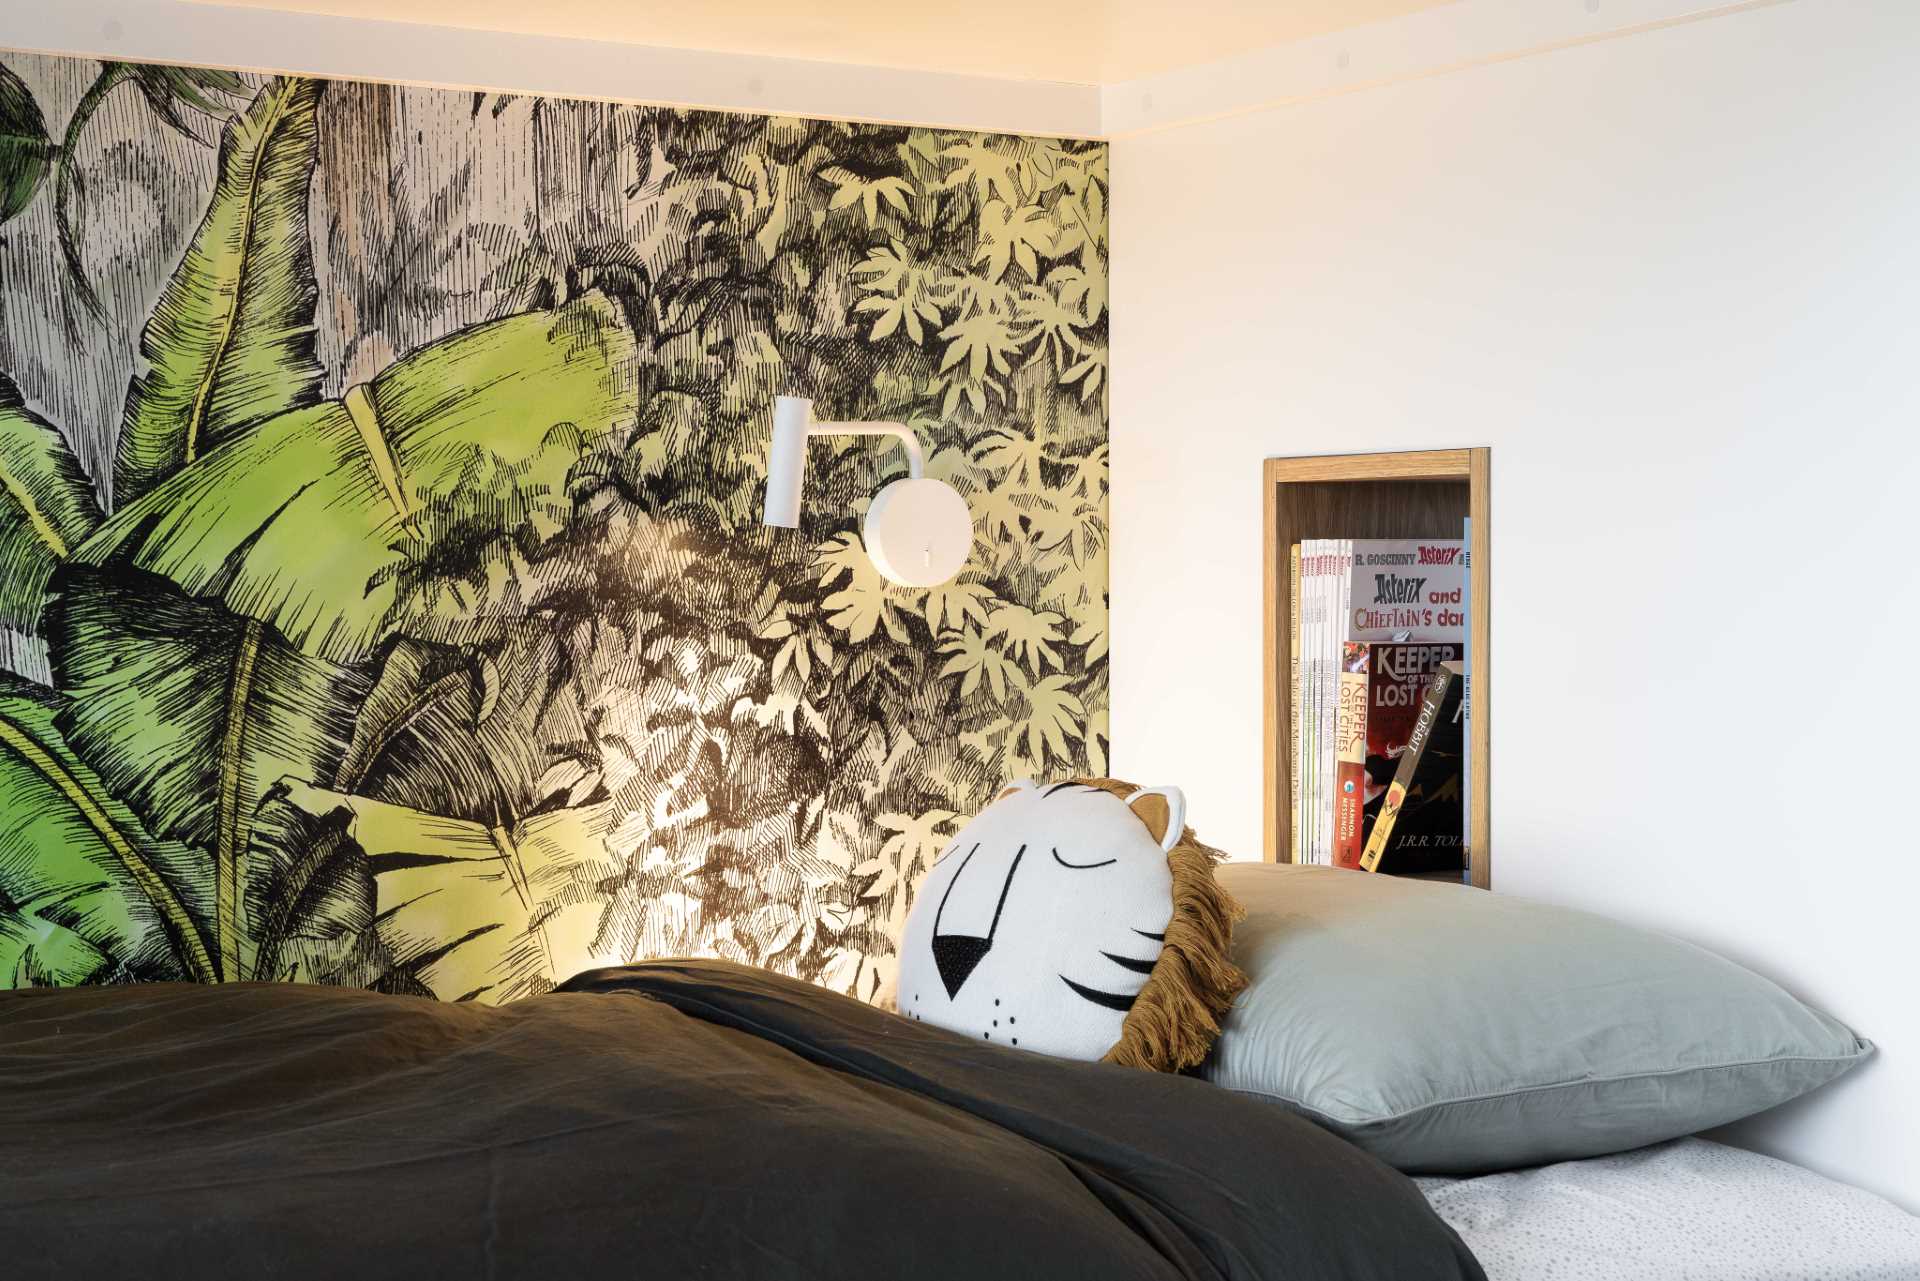 A modern jungle-themed bedroom for two brothers includes bunk beds, rope work, stairs with storage, and tree-top wallpaper.